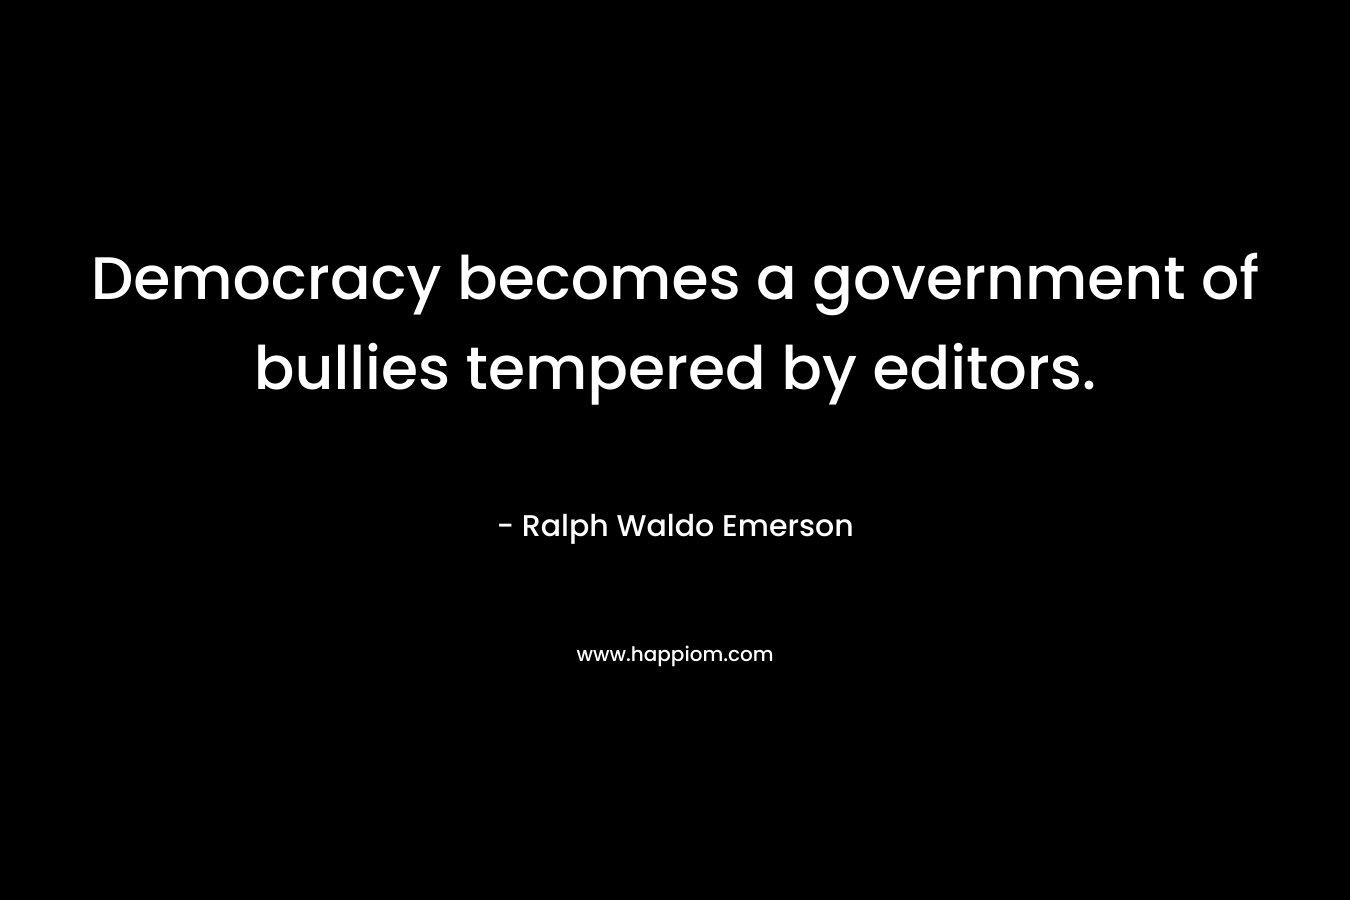 Democracy becomes a government of bullies tempered by editors.